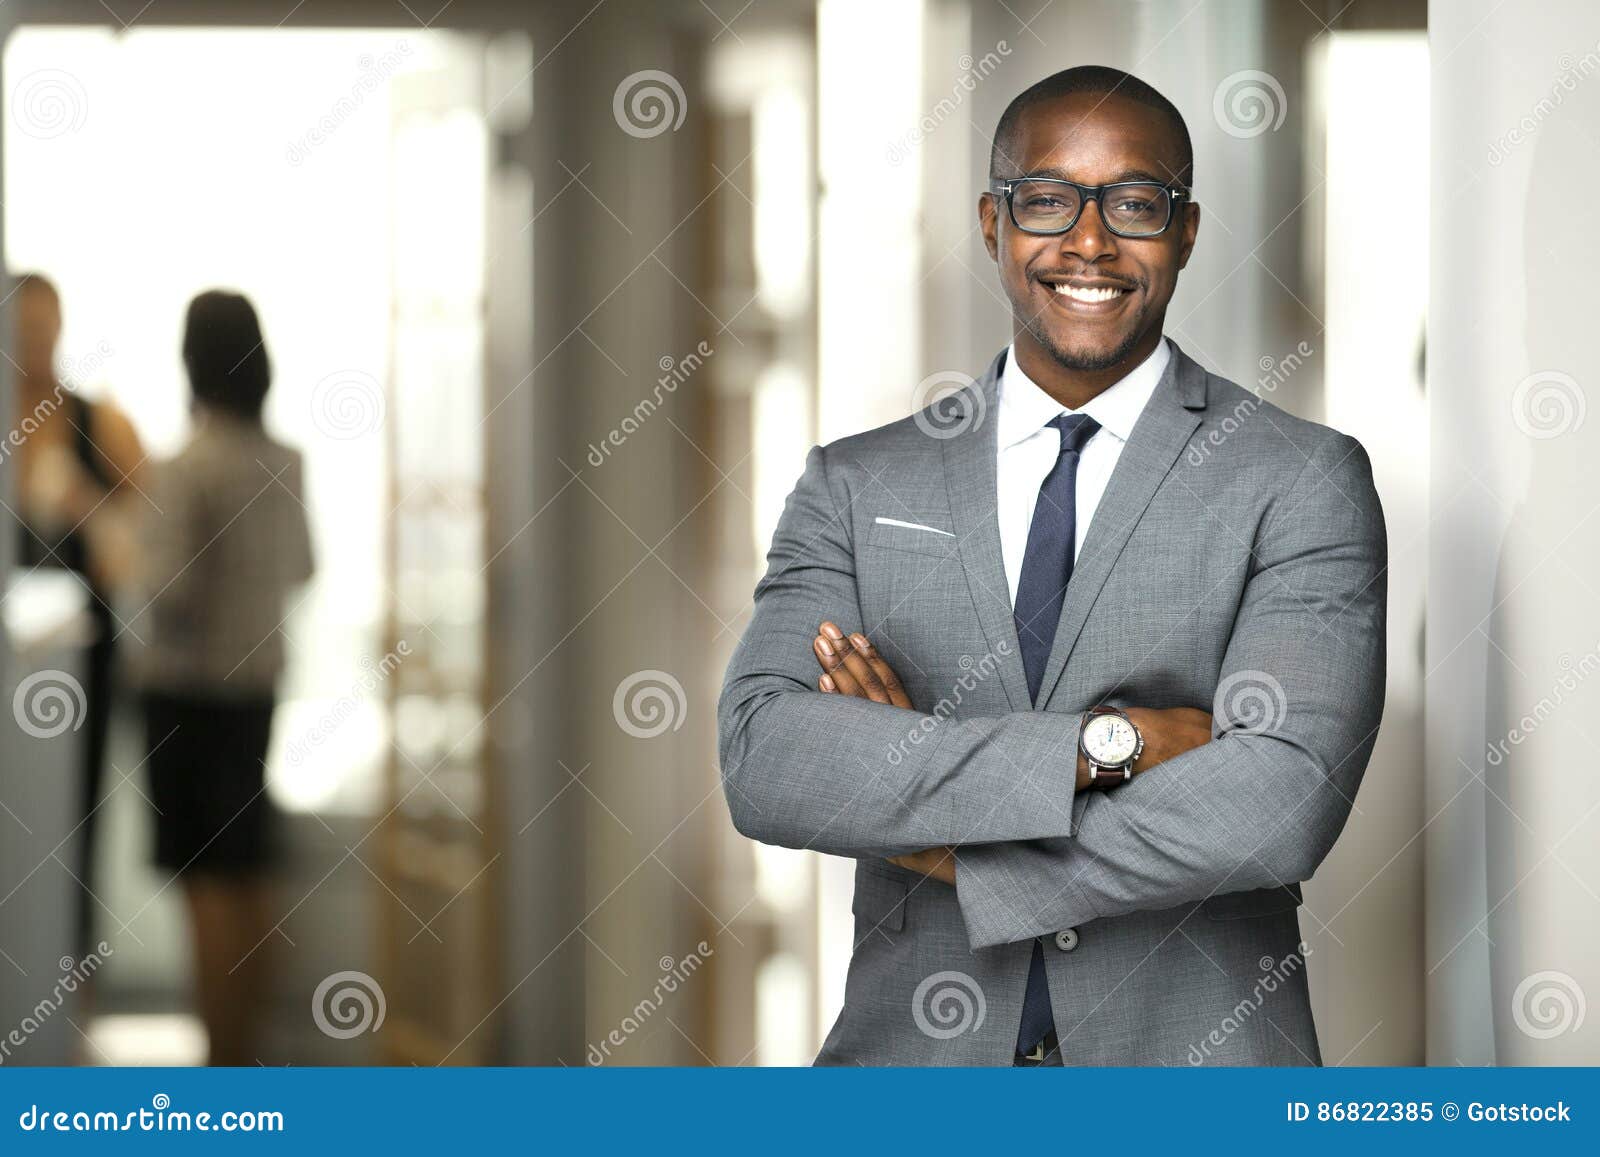 handsome cheerful african american executive business man at the workspace office